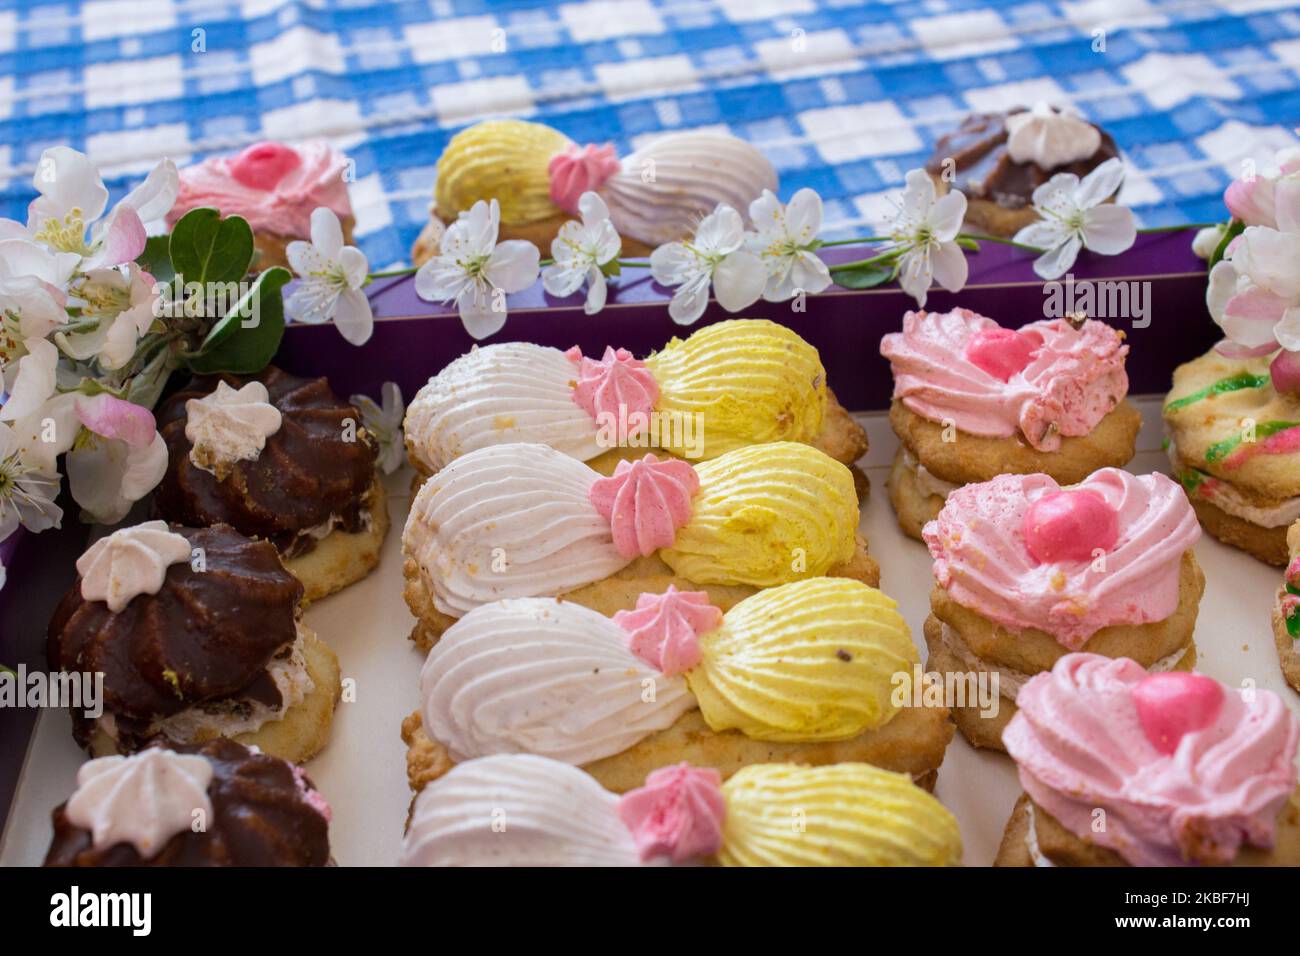 Colorful cookies in cream on cherry blossom Stock Photo